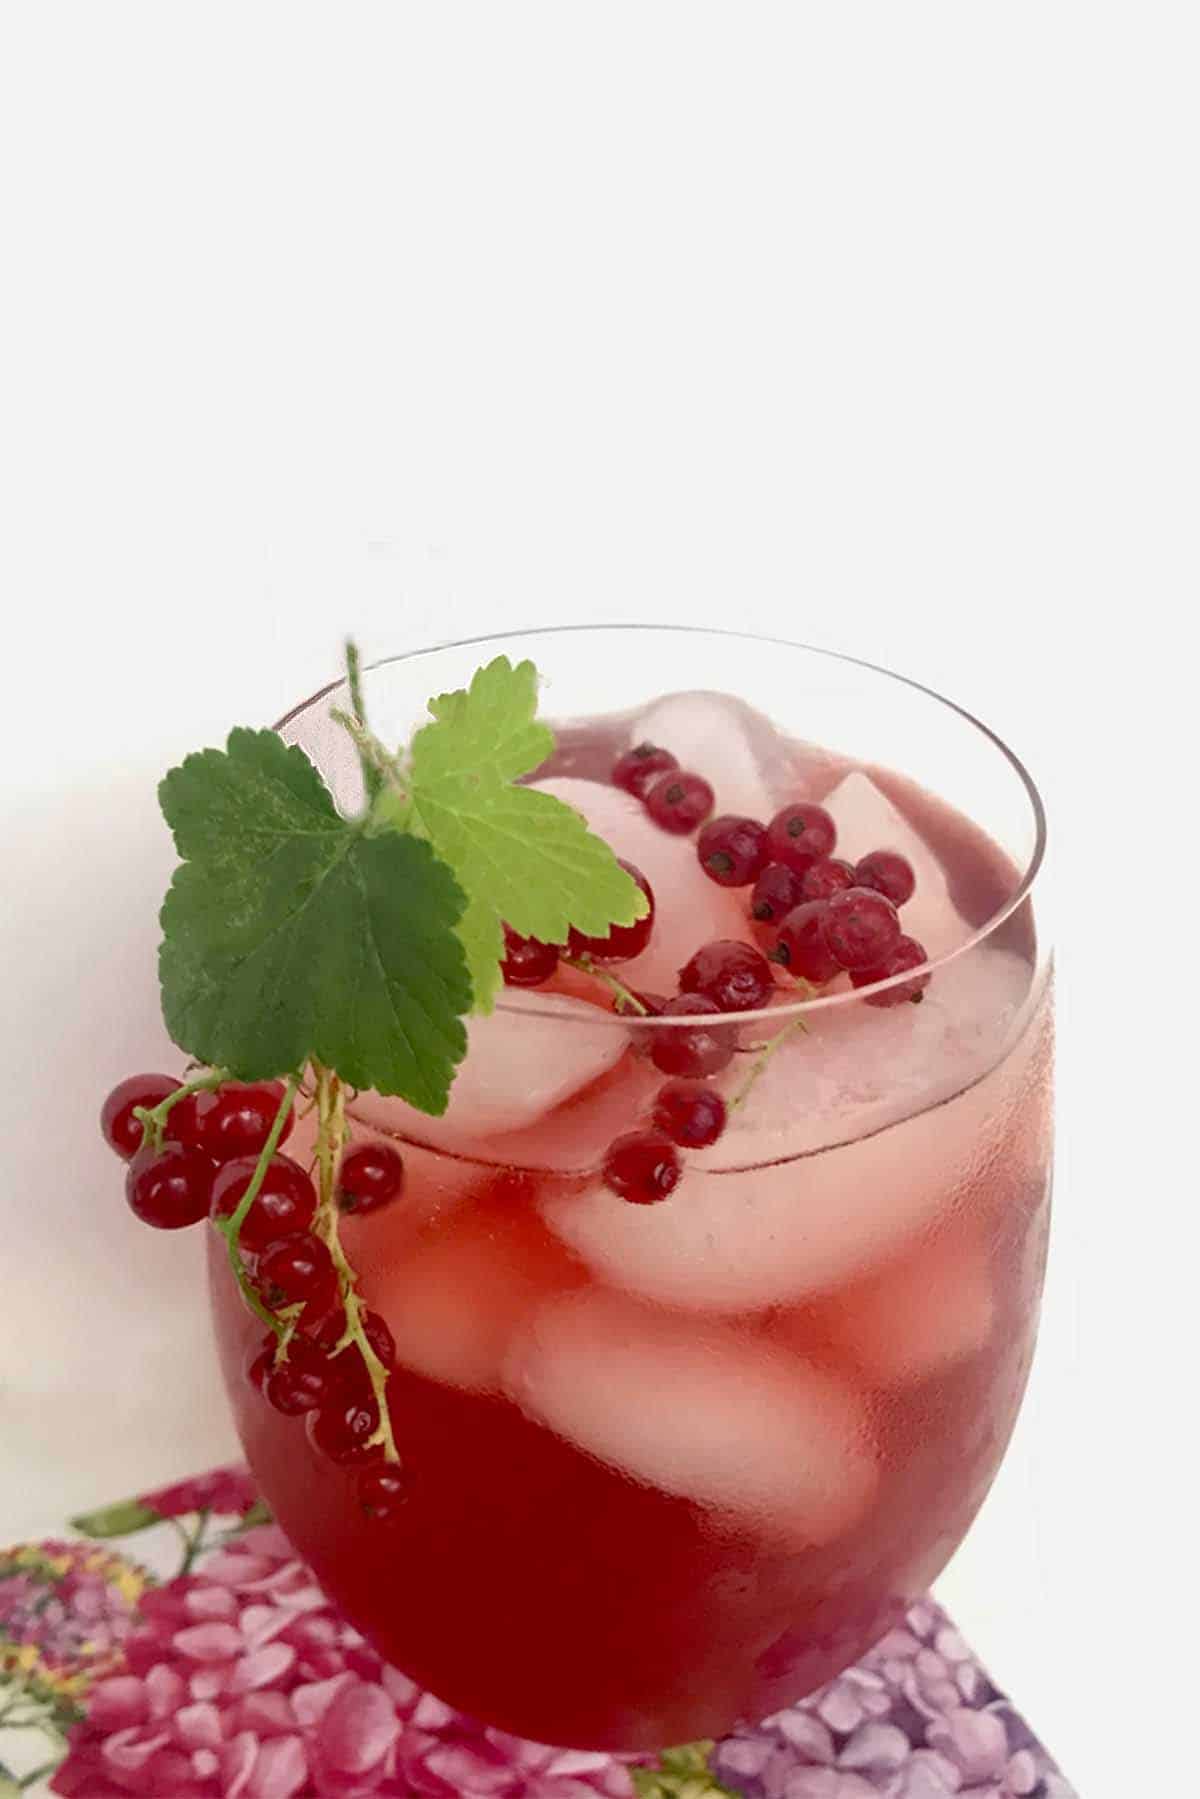 A glass of honey iced tea with red currants and currant leaves.